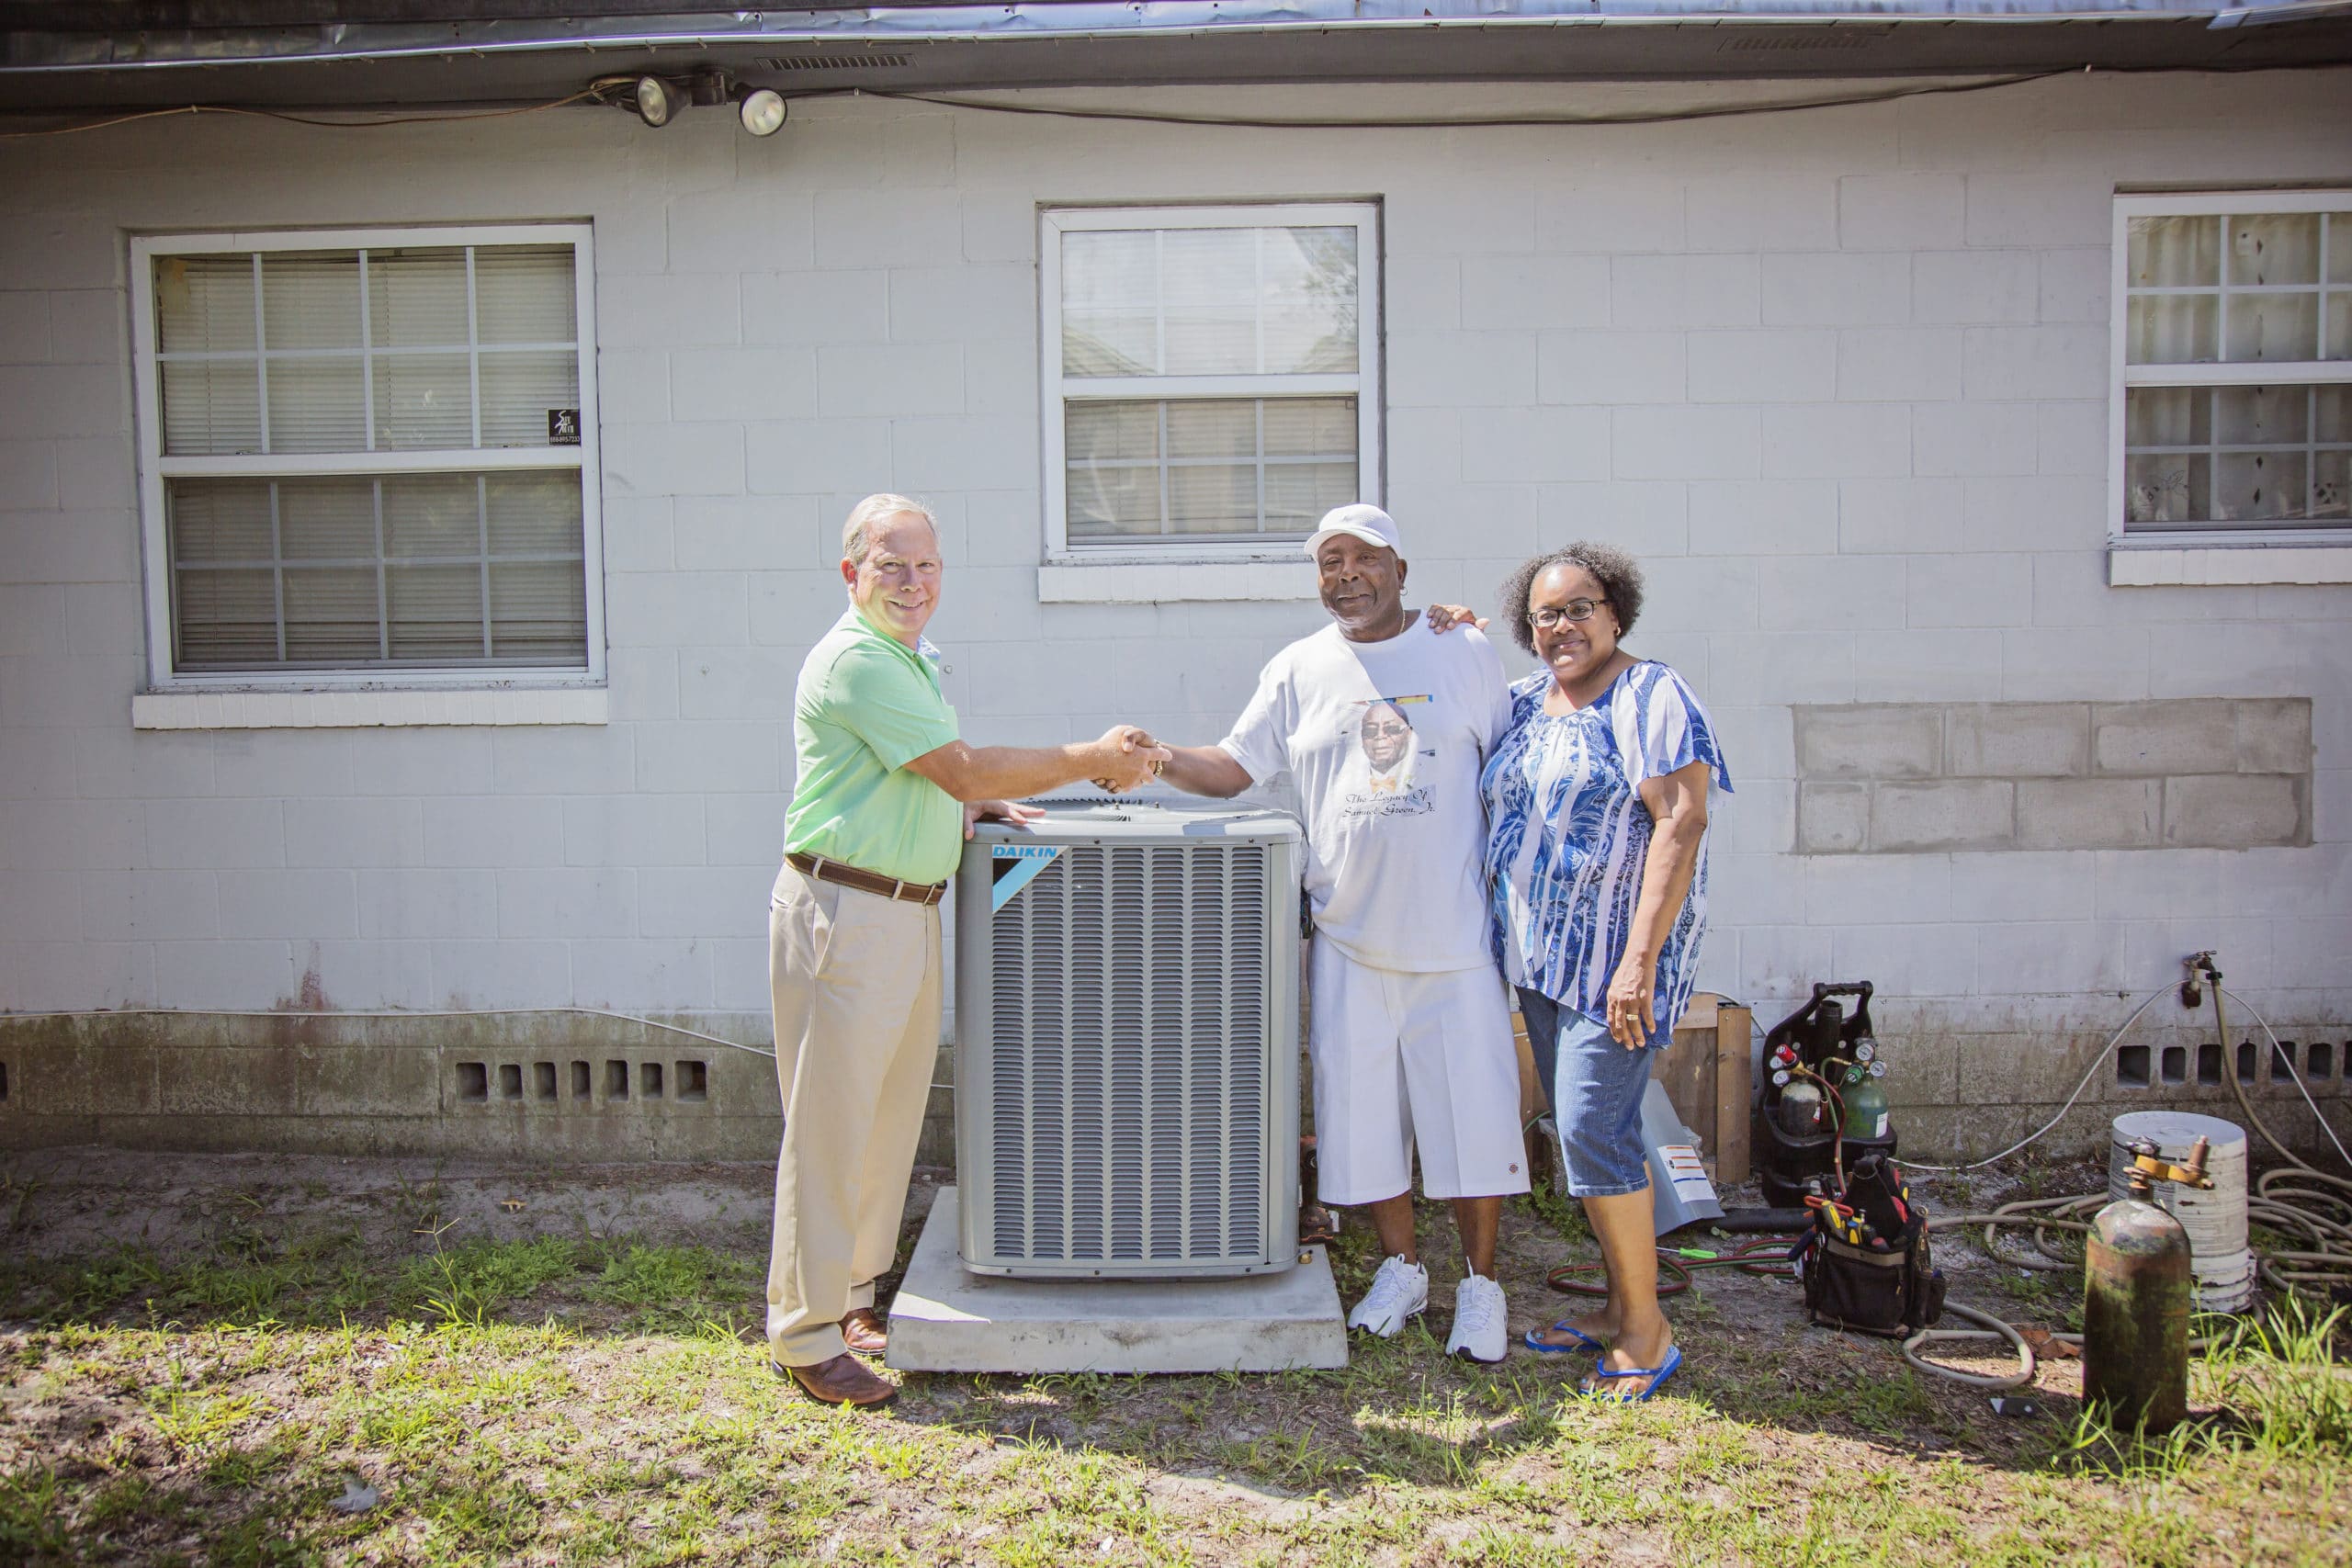 AC Repair Services in Jacksonville, FL and Neighboring Areas